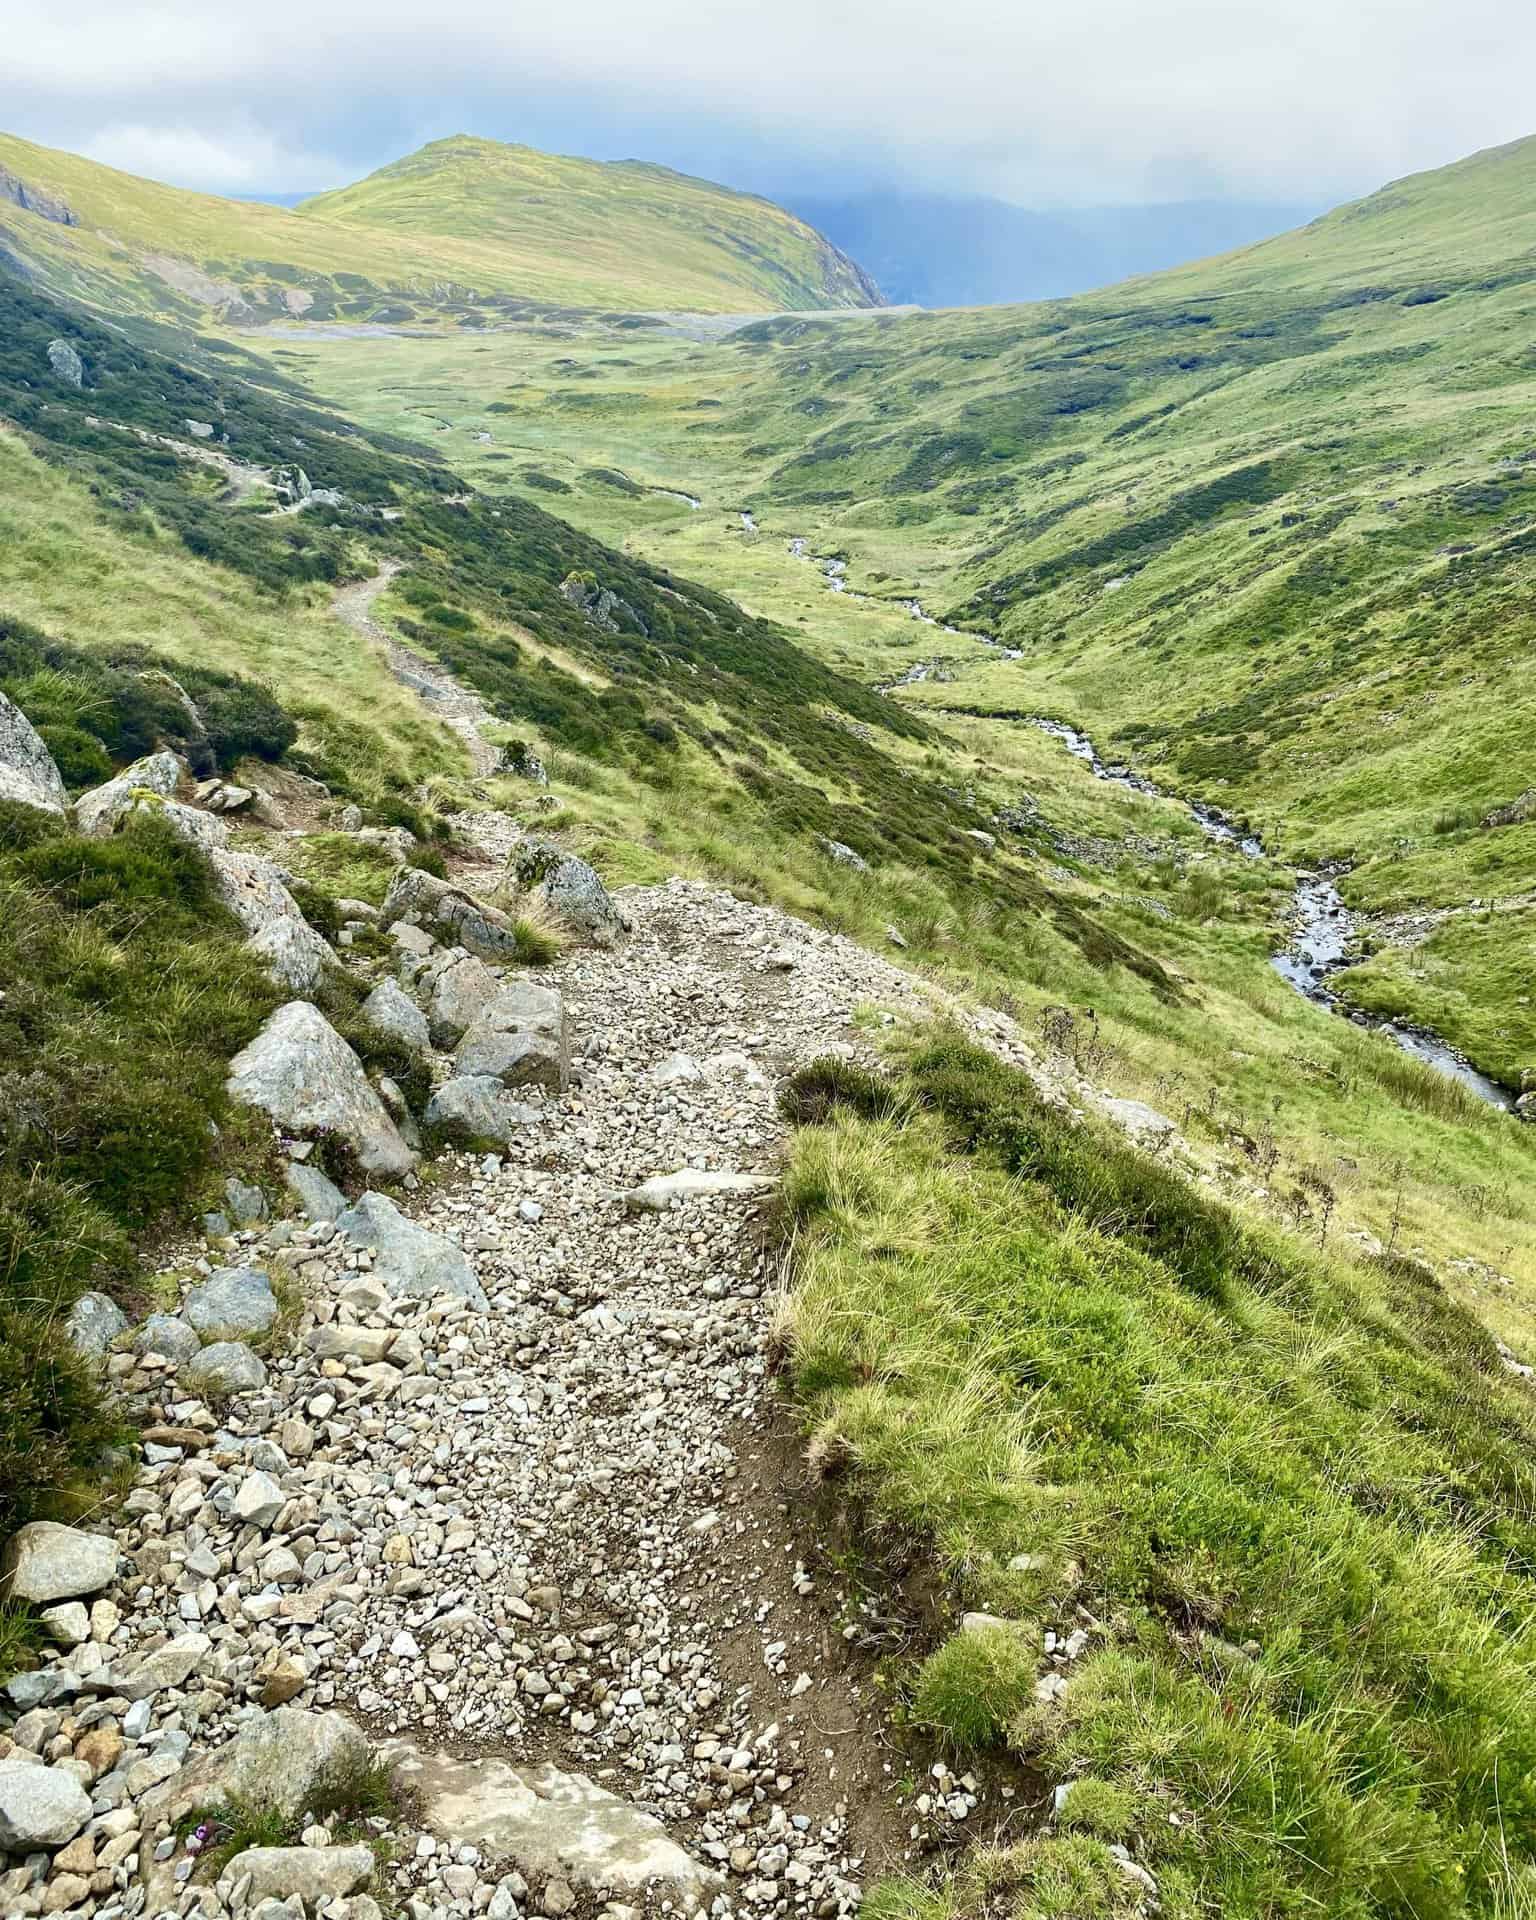 Sticks Gill flowing through the valley, with Sheffield Pike in the background.